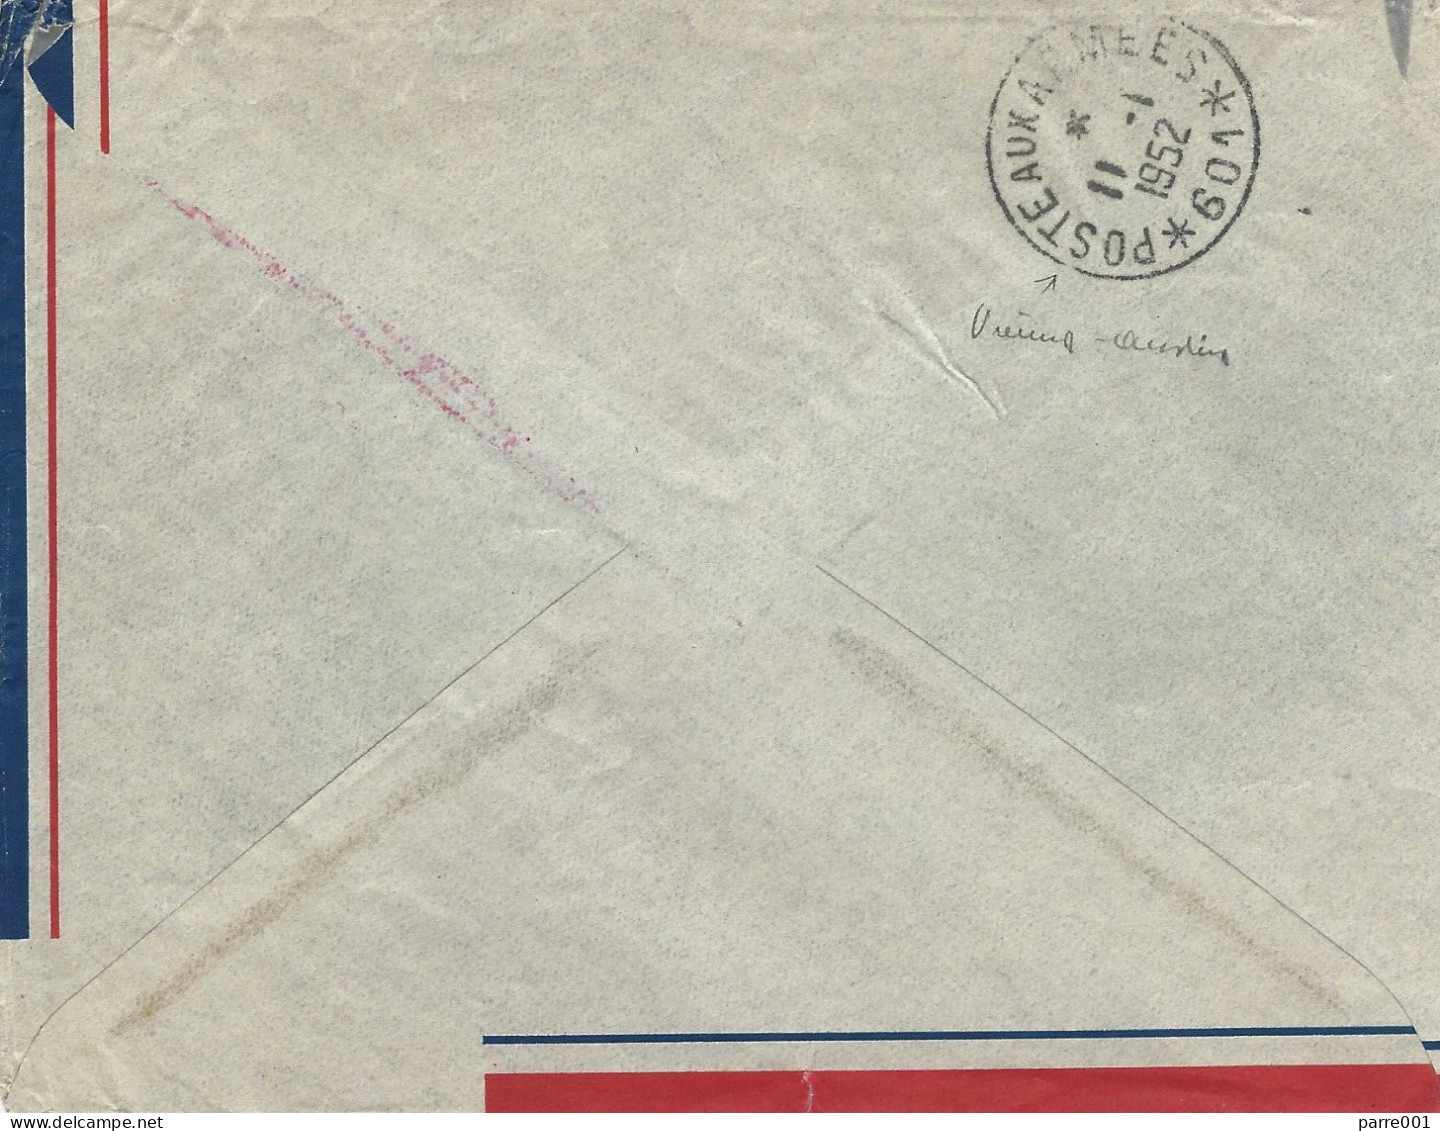 France 1952 Poste Aux Armees  T.O.E Indochine To BMP 601 Vienna Austria French Occupation Forces T.O.A. Official Cover - War Of Indo-China / Vietnam